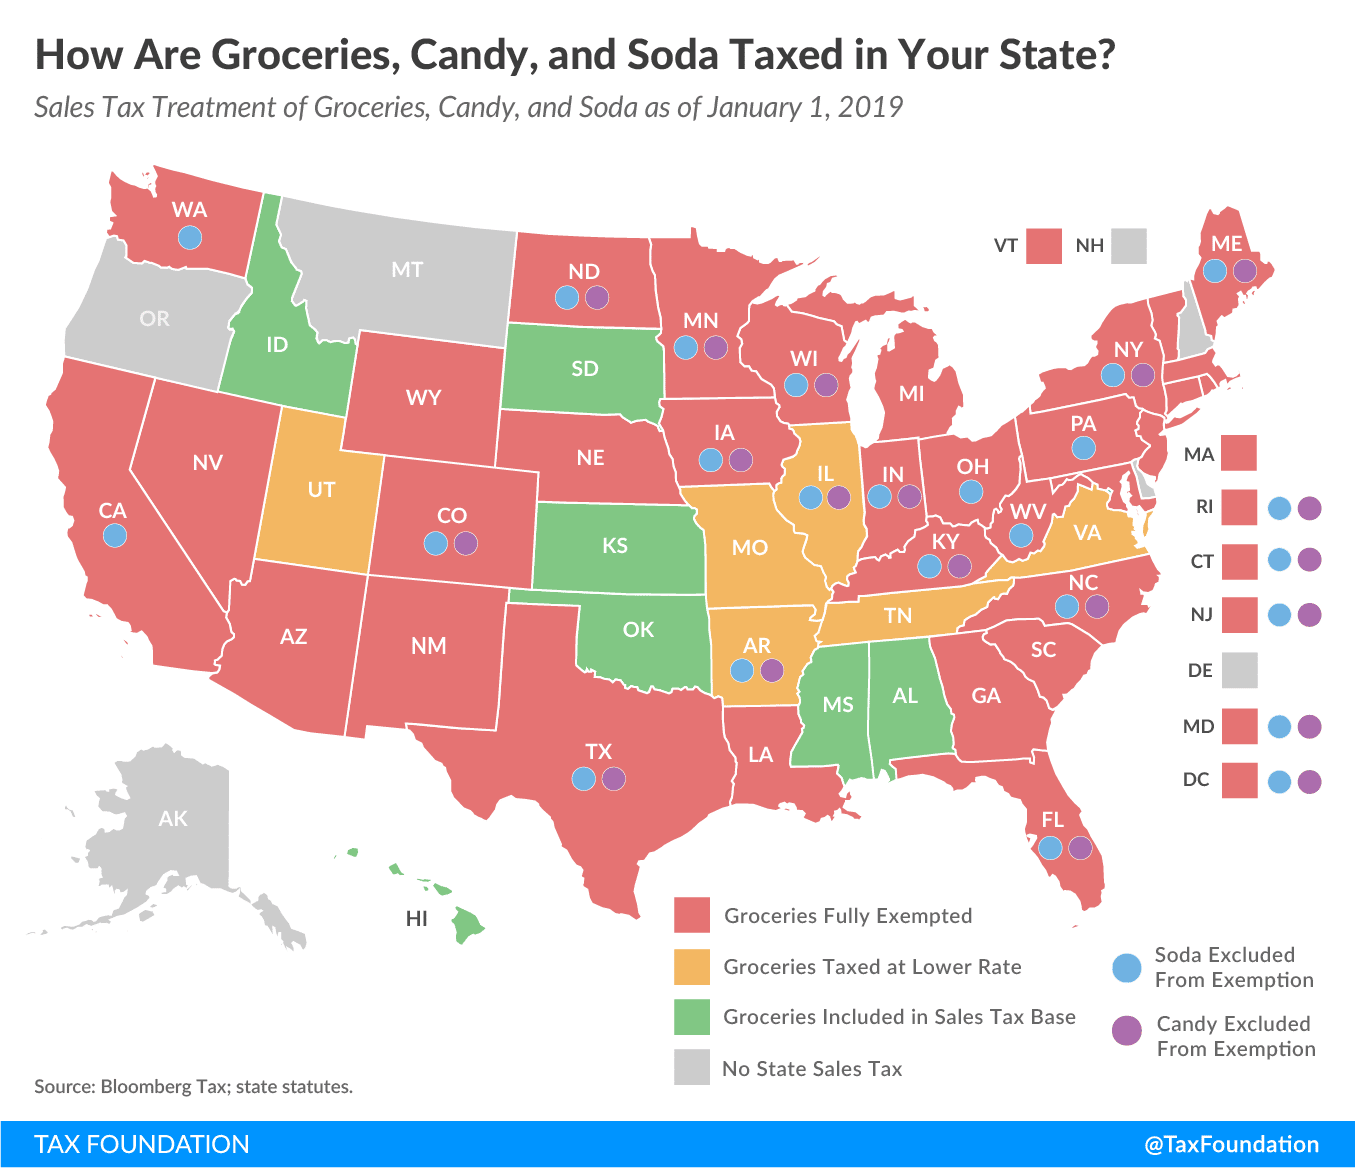 How Are Groceries, Candy, and Soda Taxed in Your State?